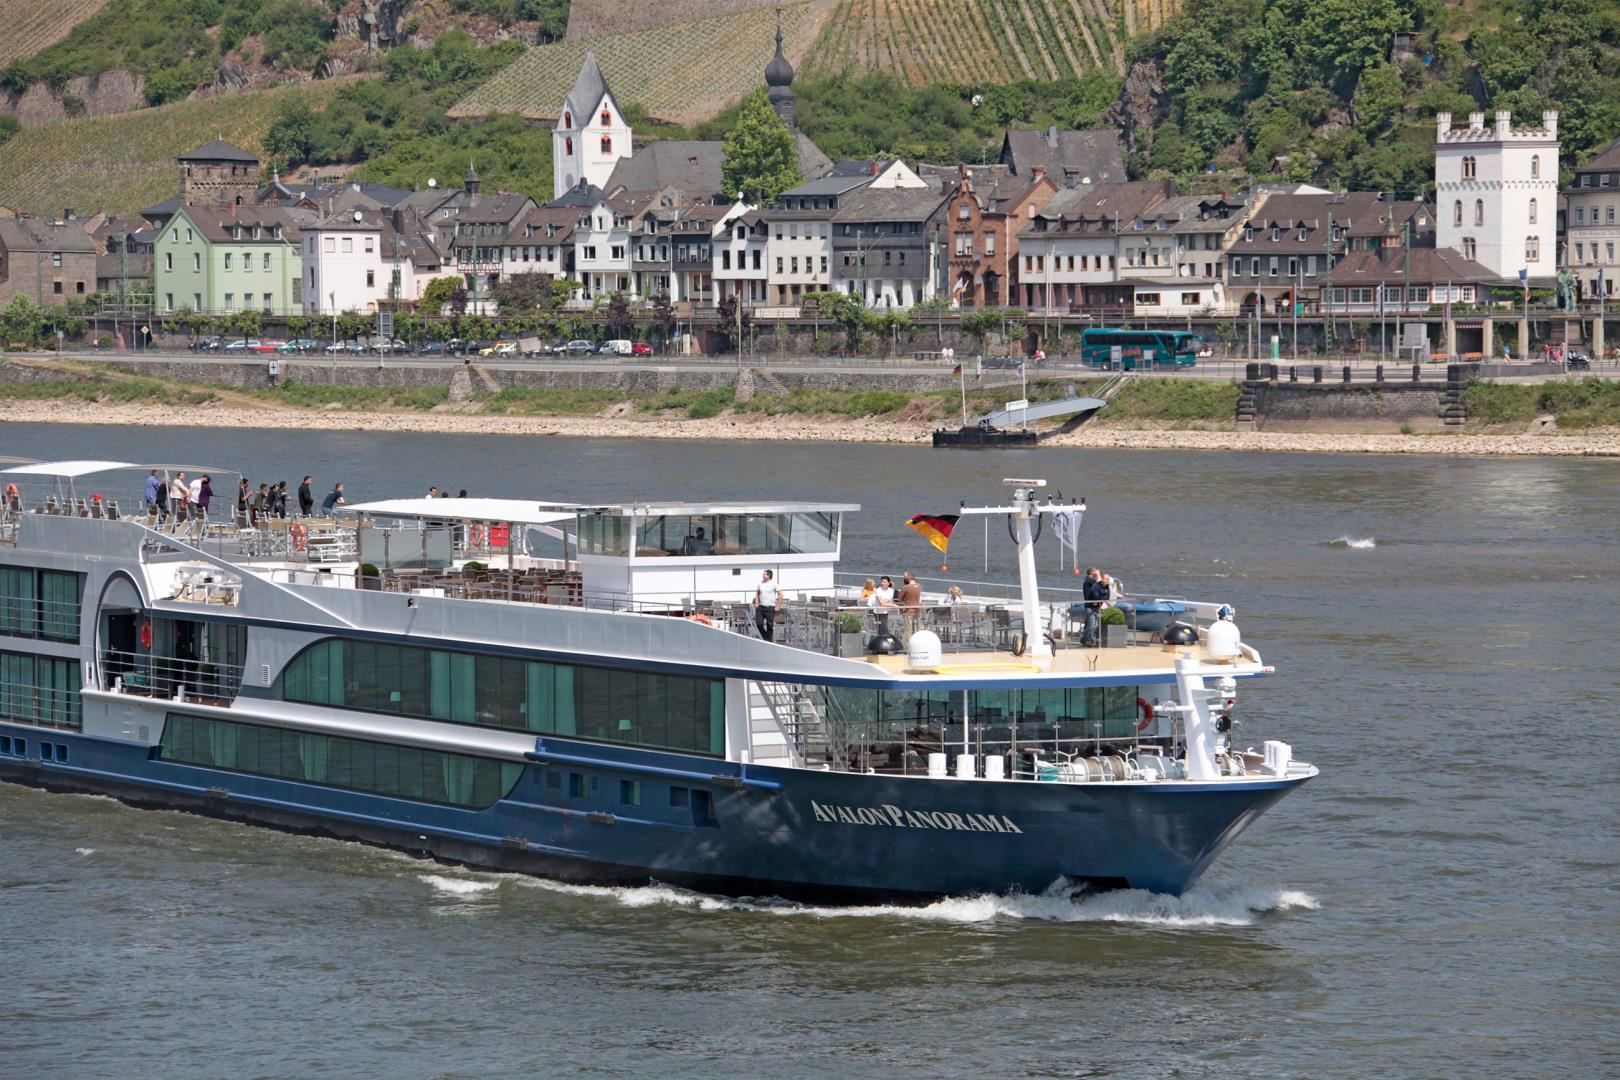 Active & Discovery On The Rhine With 1 Night In Amsterdam (Southbound)